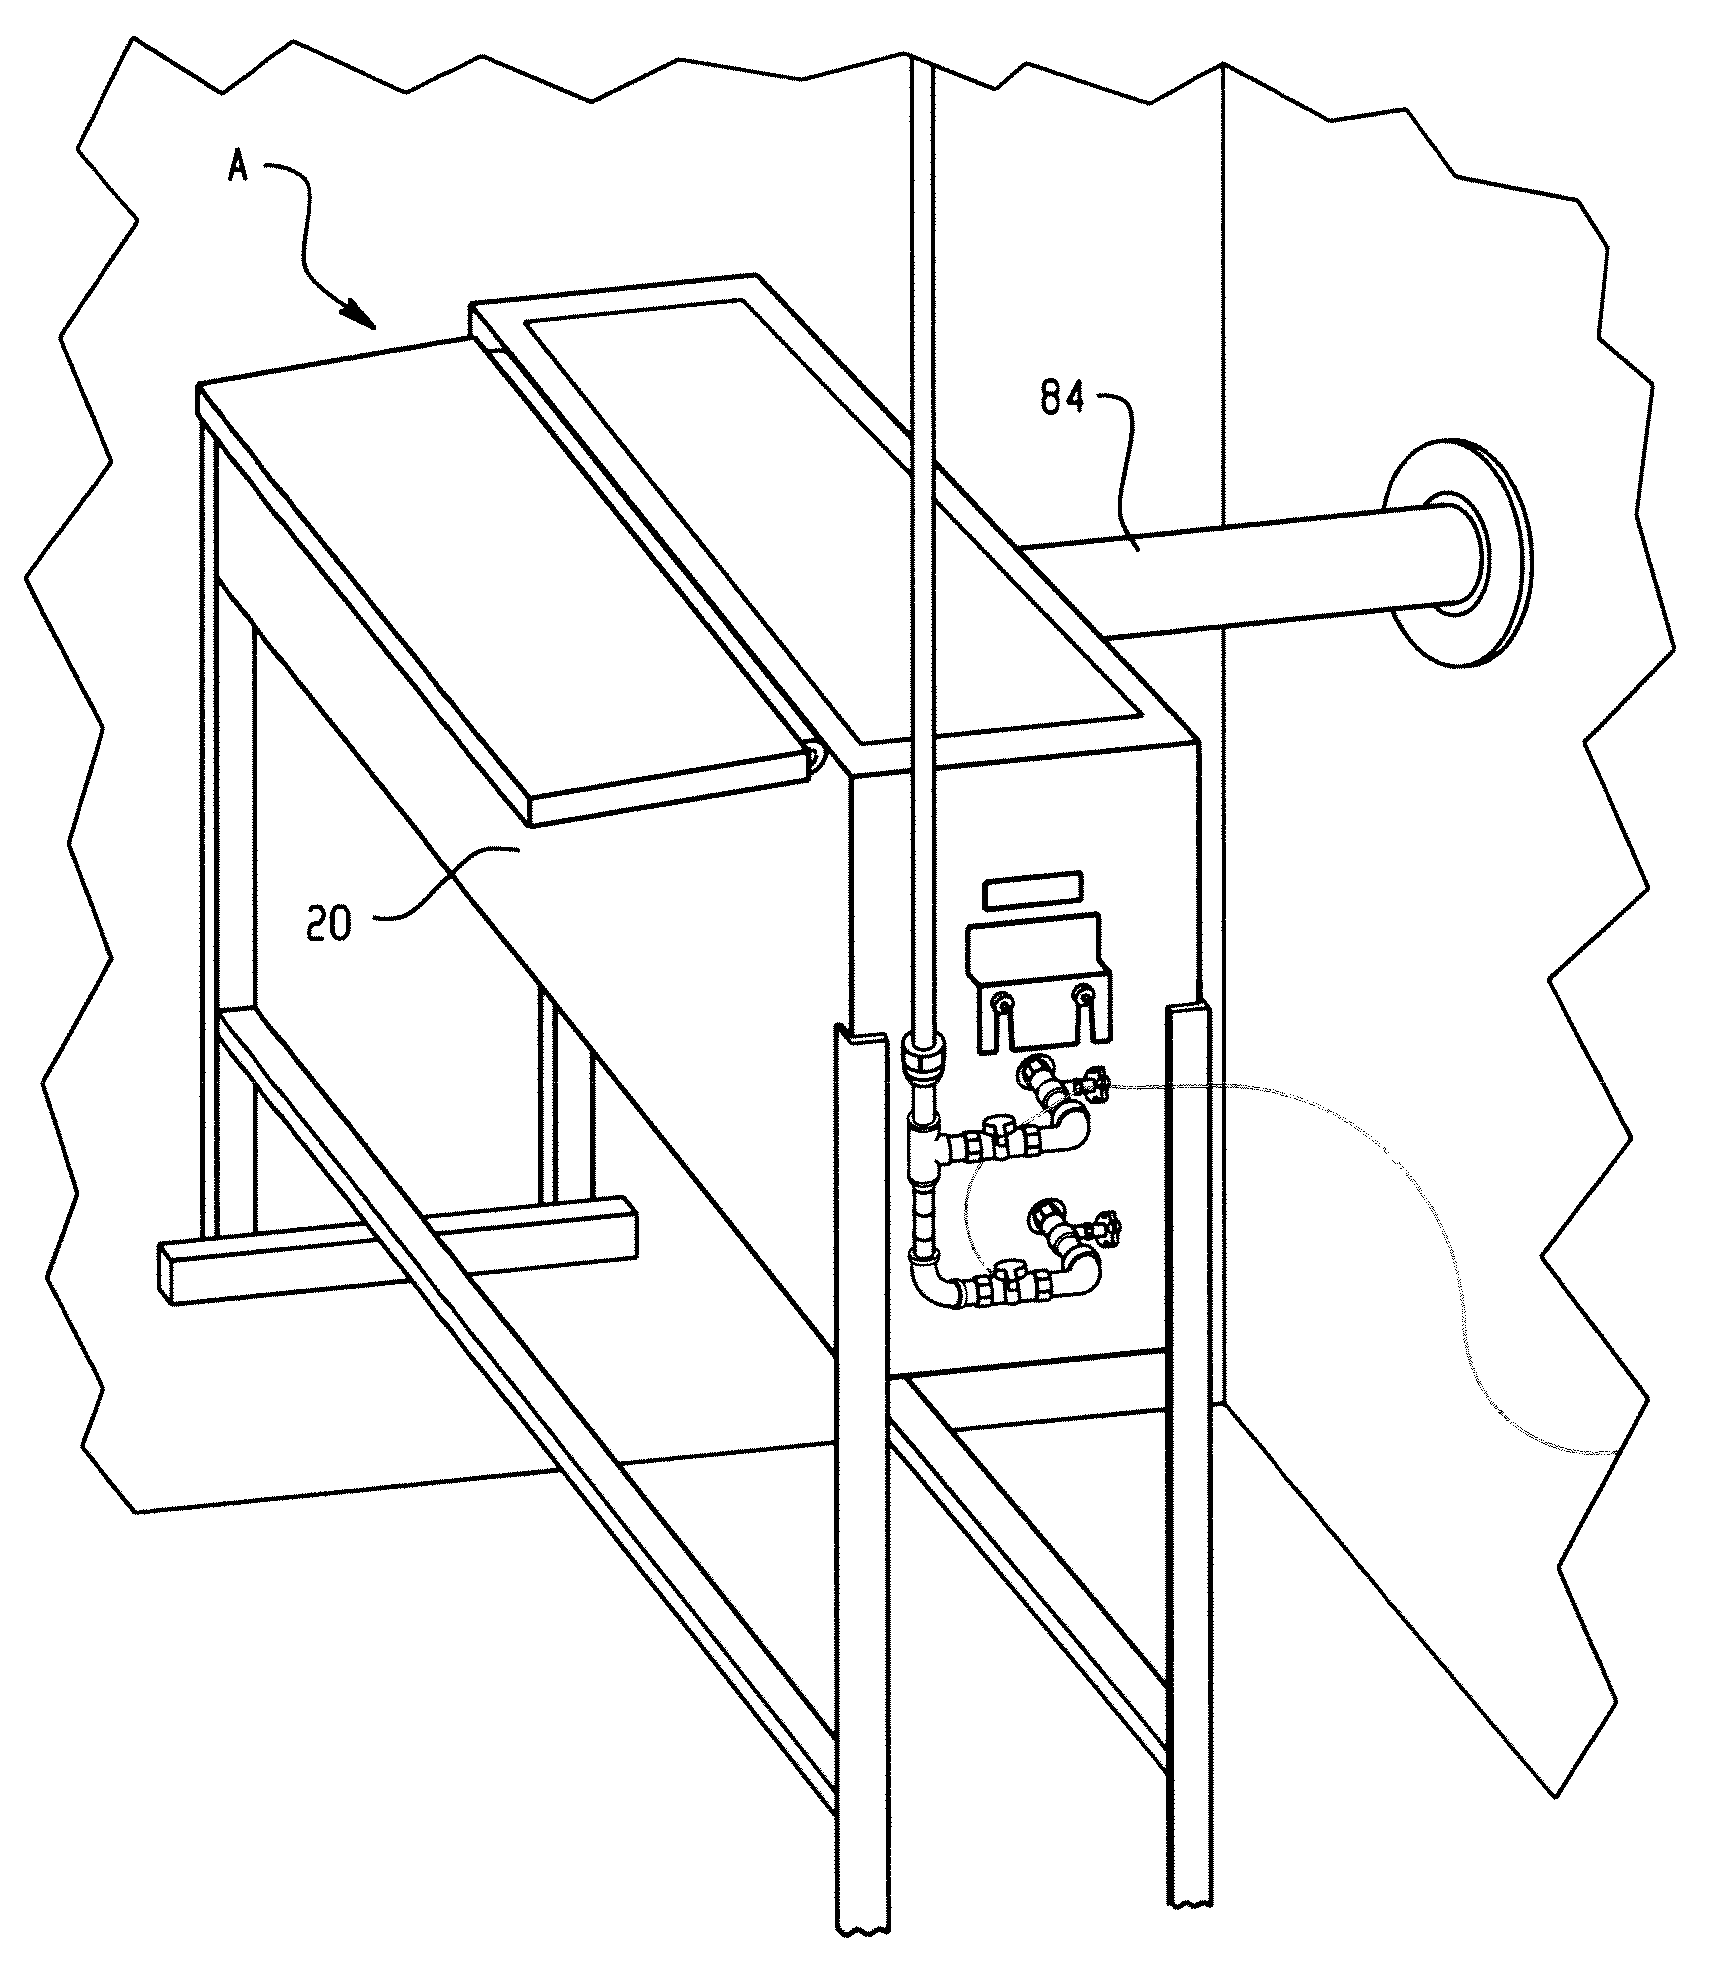 Method and apparatus for testing building materials